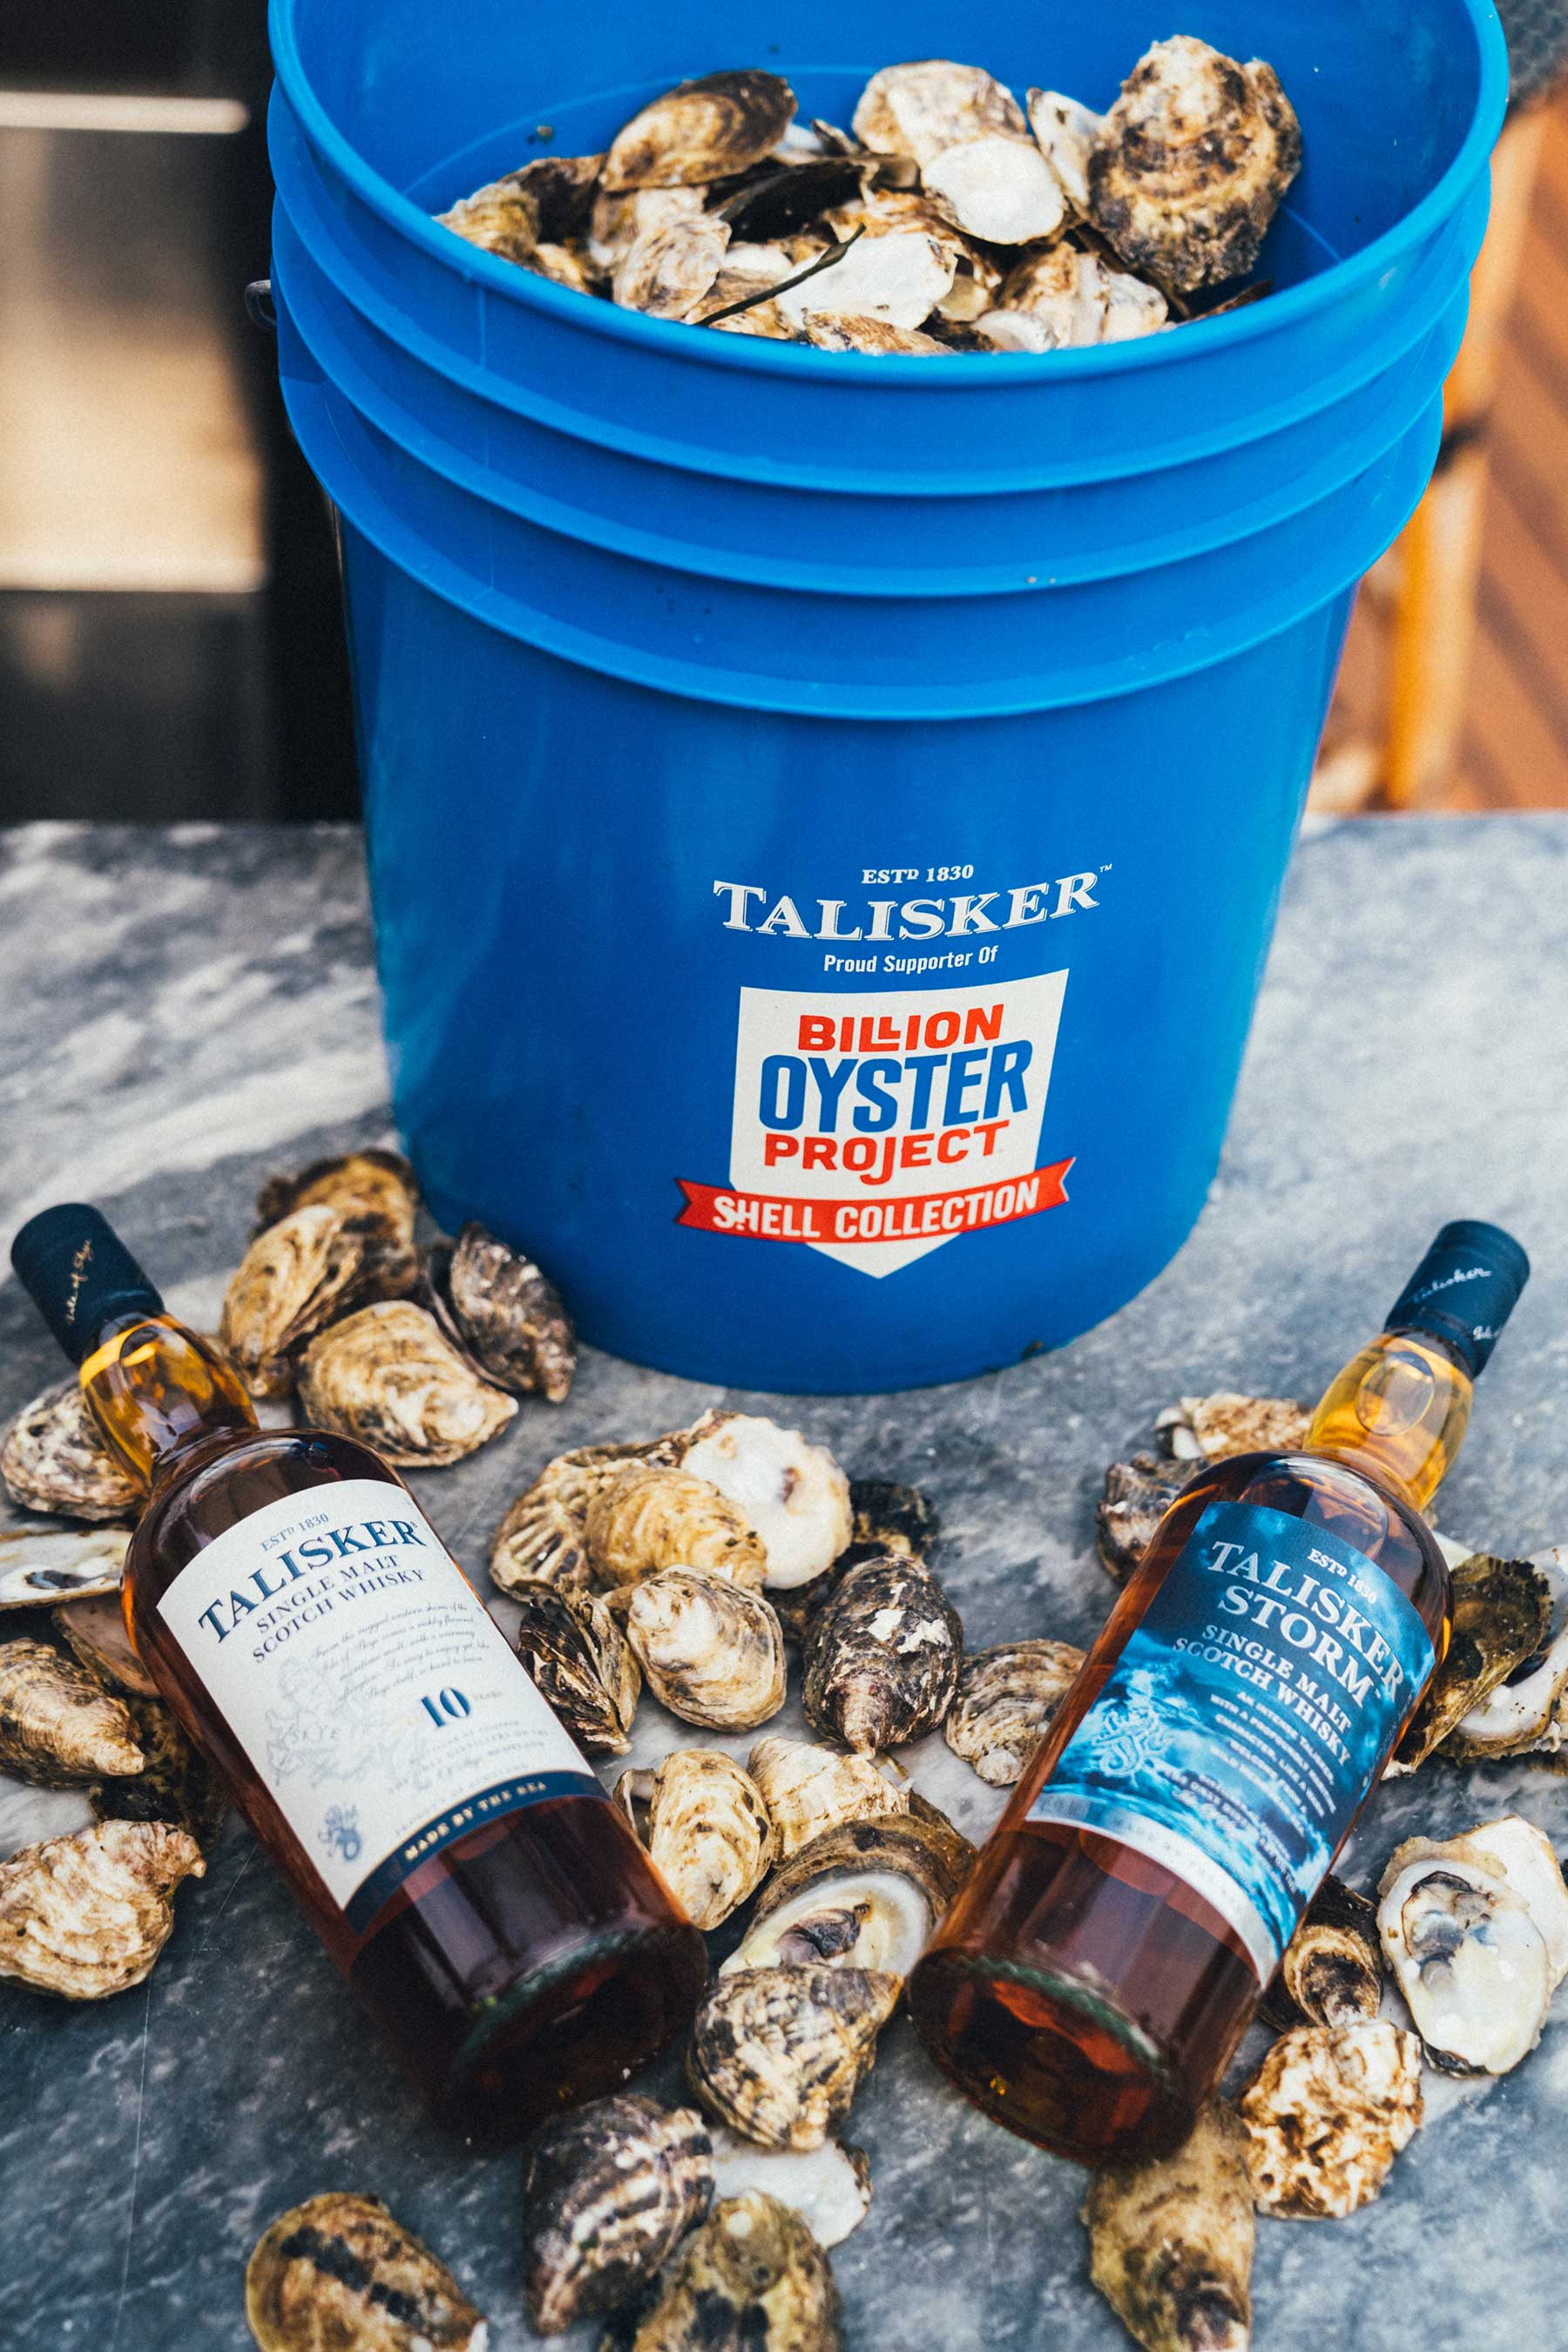 Talisker will support Billion Oyster Project’s ongoing shell collection operations, which are expected to collect more than 200,000 pounds of oyster shells from 50 NYC restaurants and divert them from landfills in 2021.